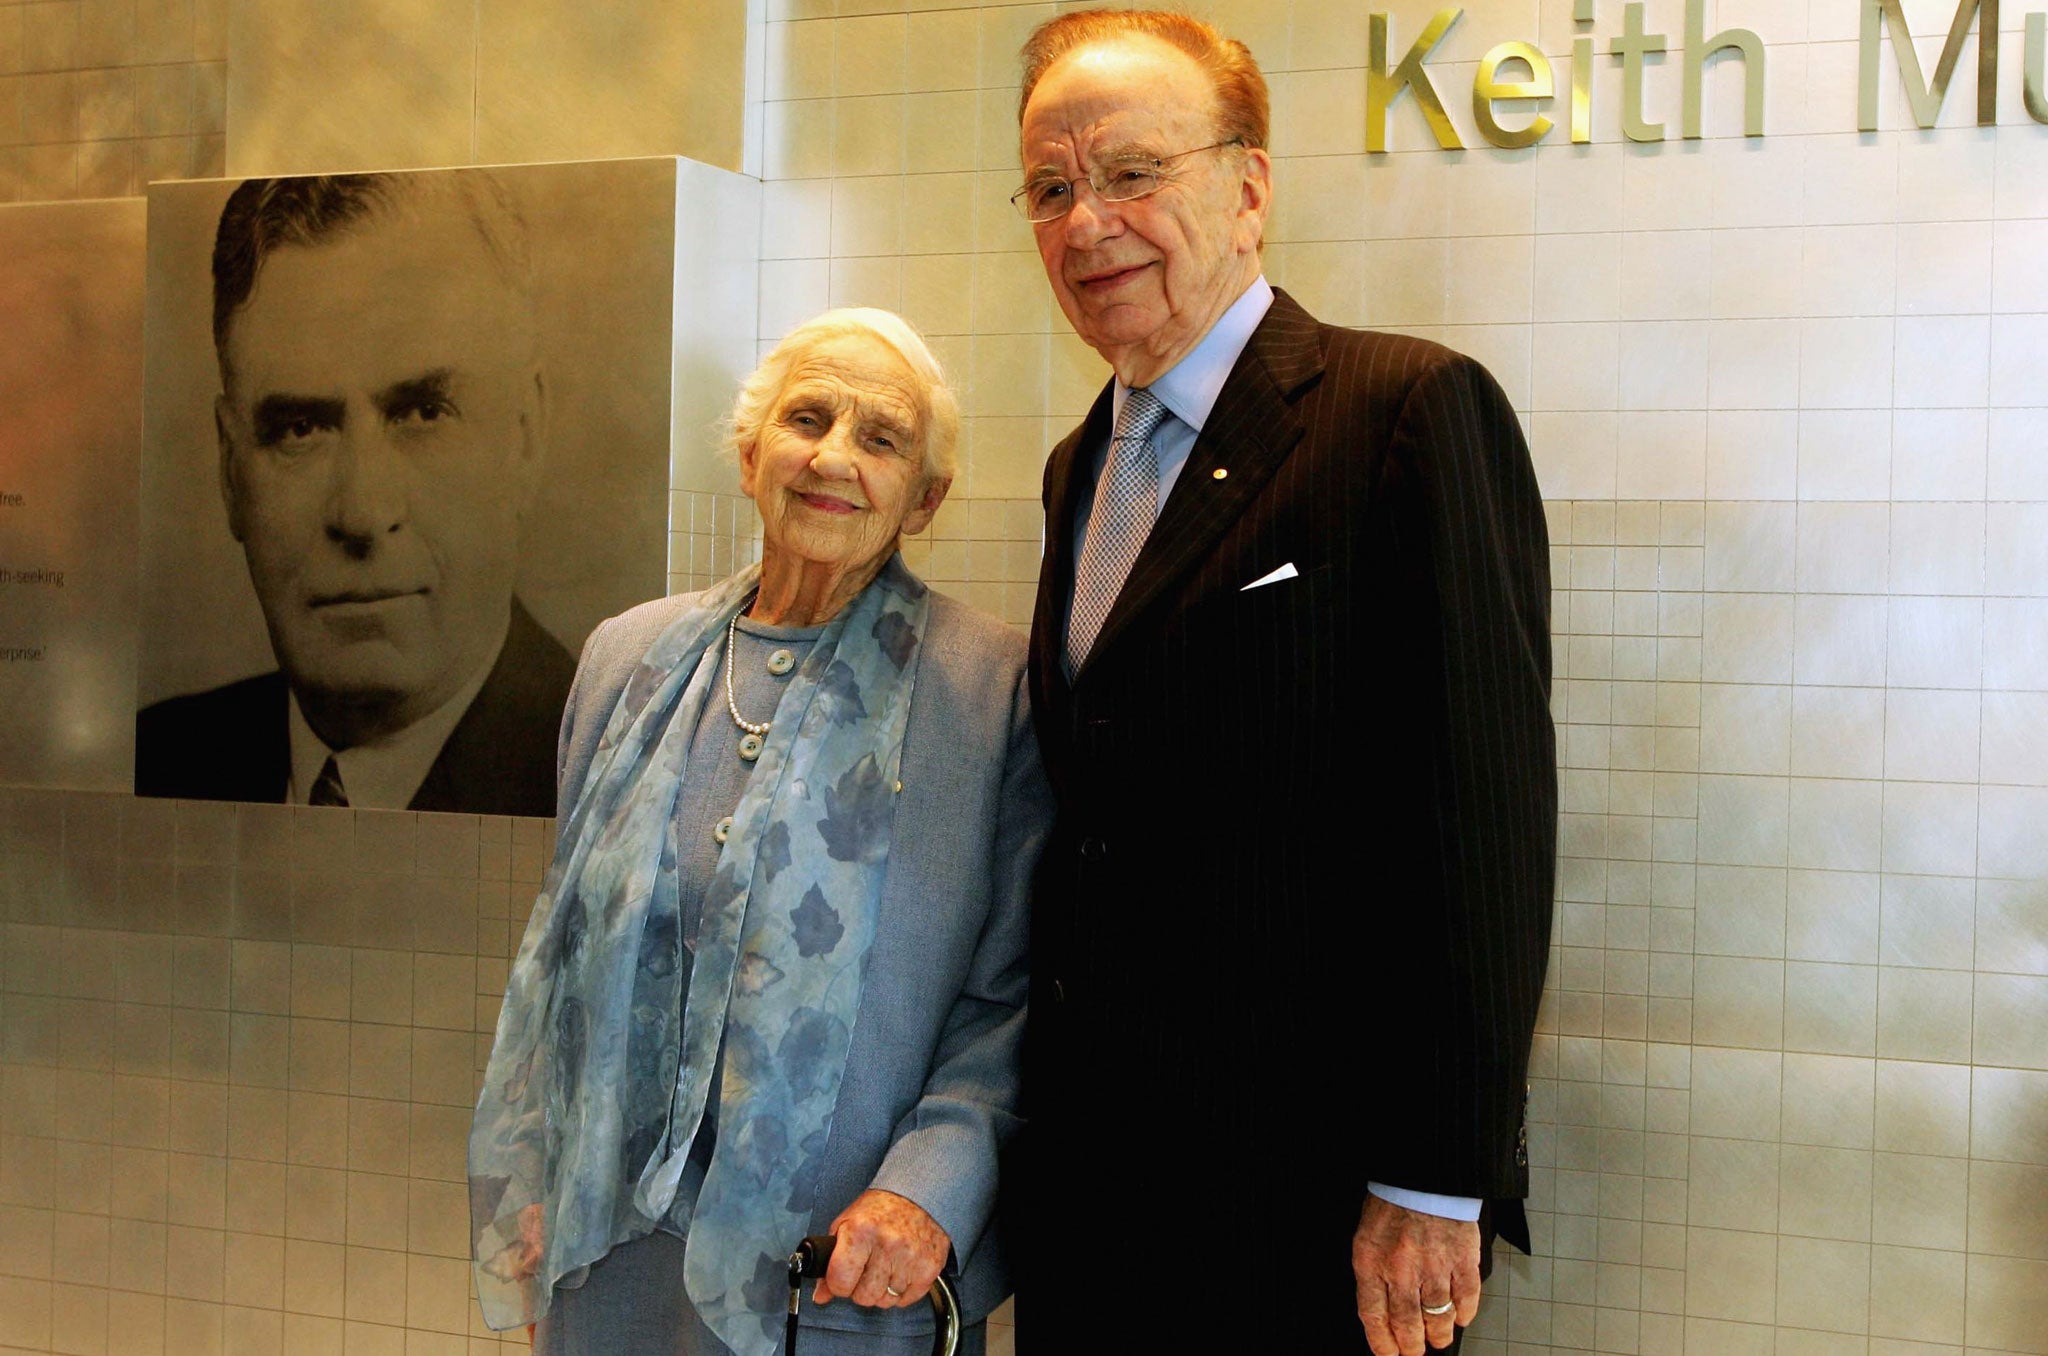 Rupert Murdoch and his mother Dame Elizabeth Murdoch attend the opening of the new Adelaide Advertiser building November 16, 2005 in Adelaide, Australia.